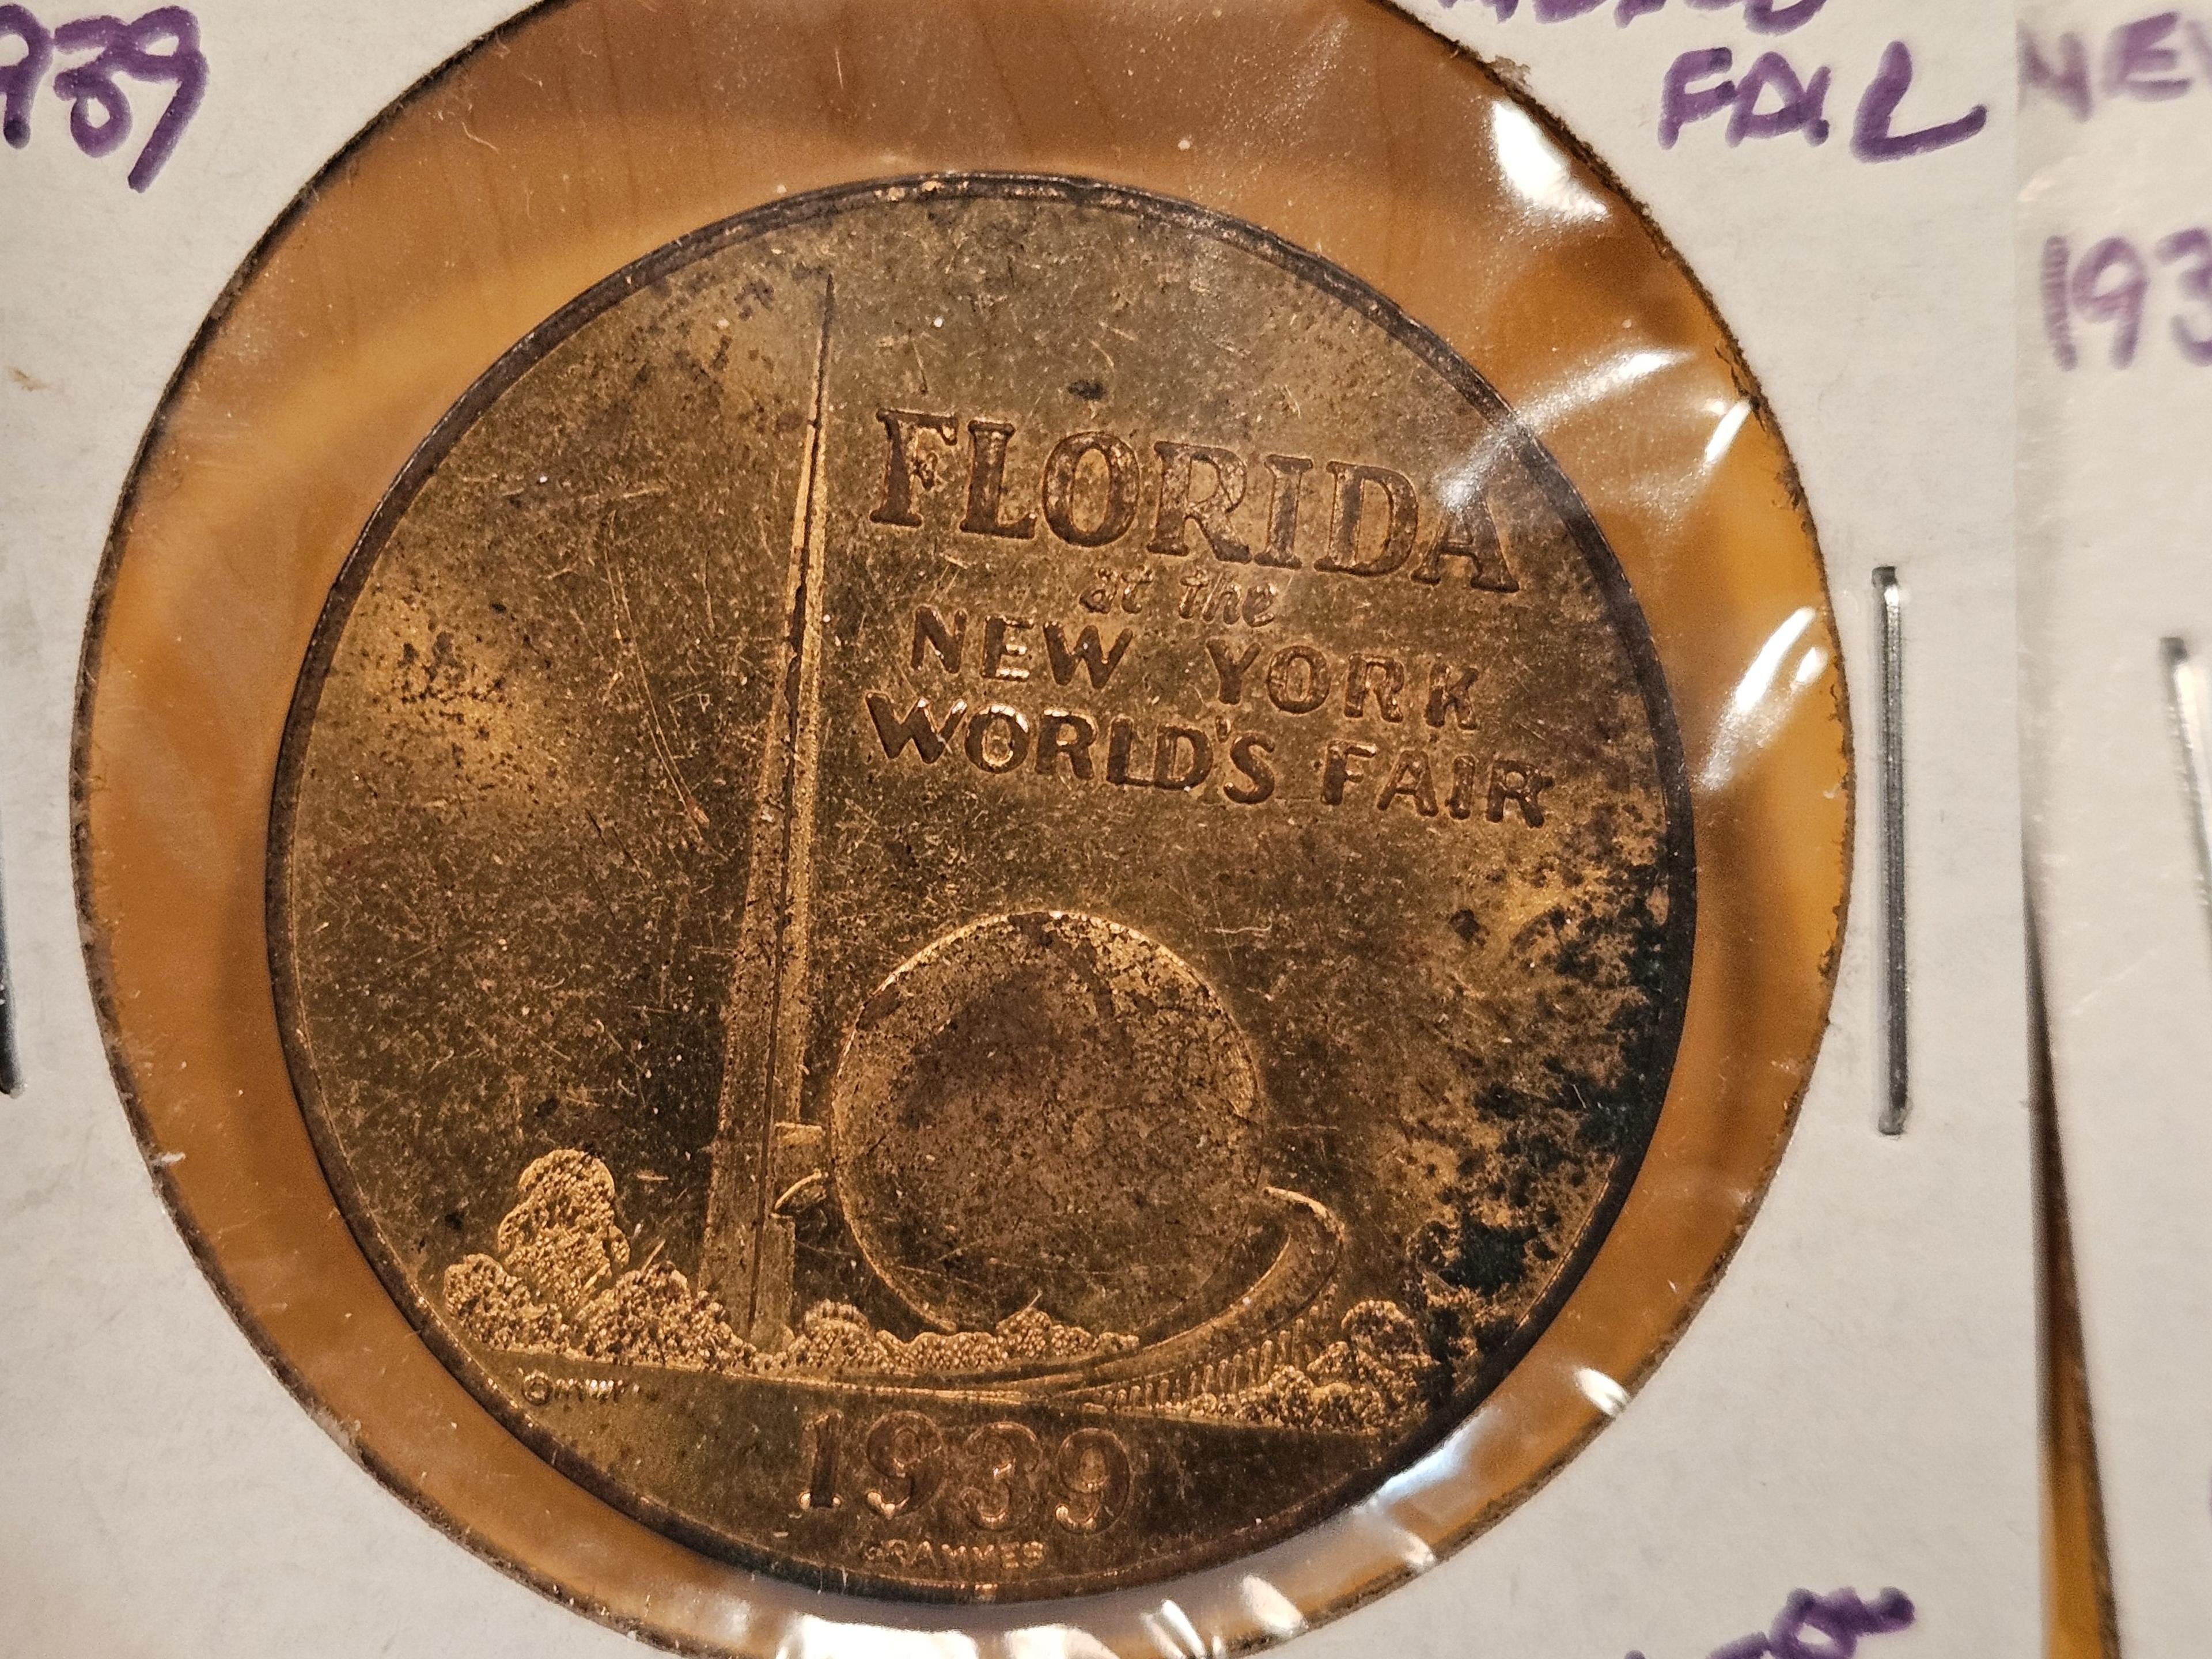 Two 1939 World's Fair medals